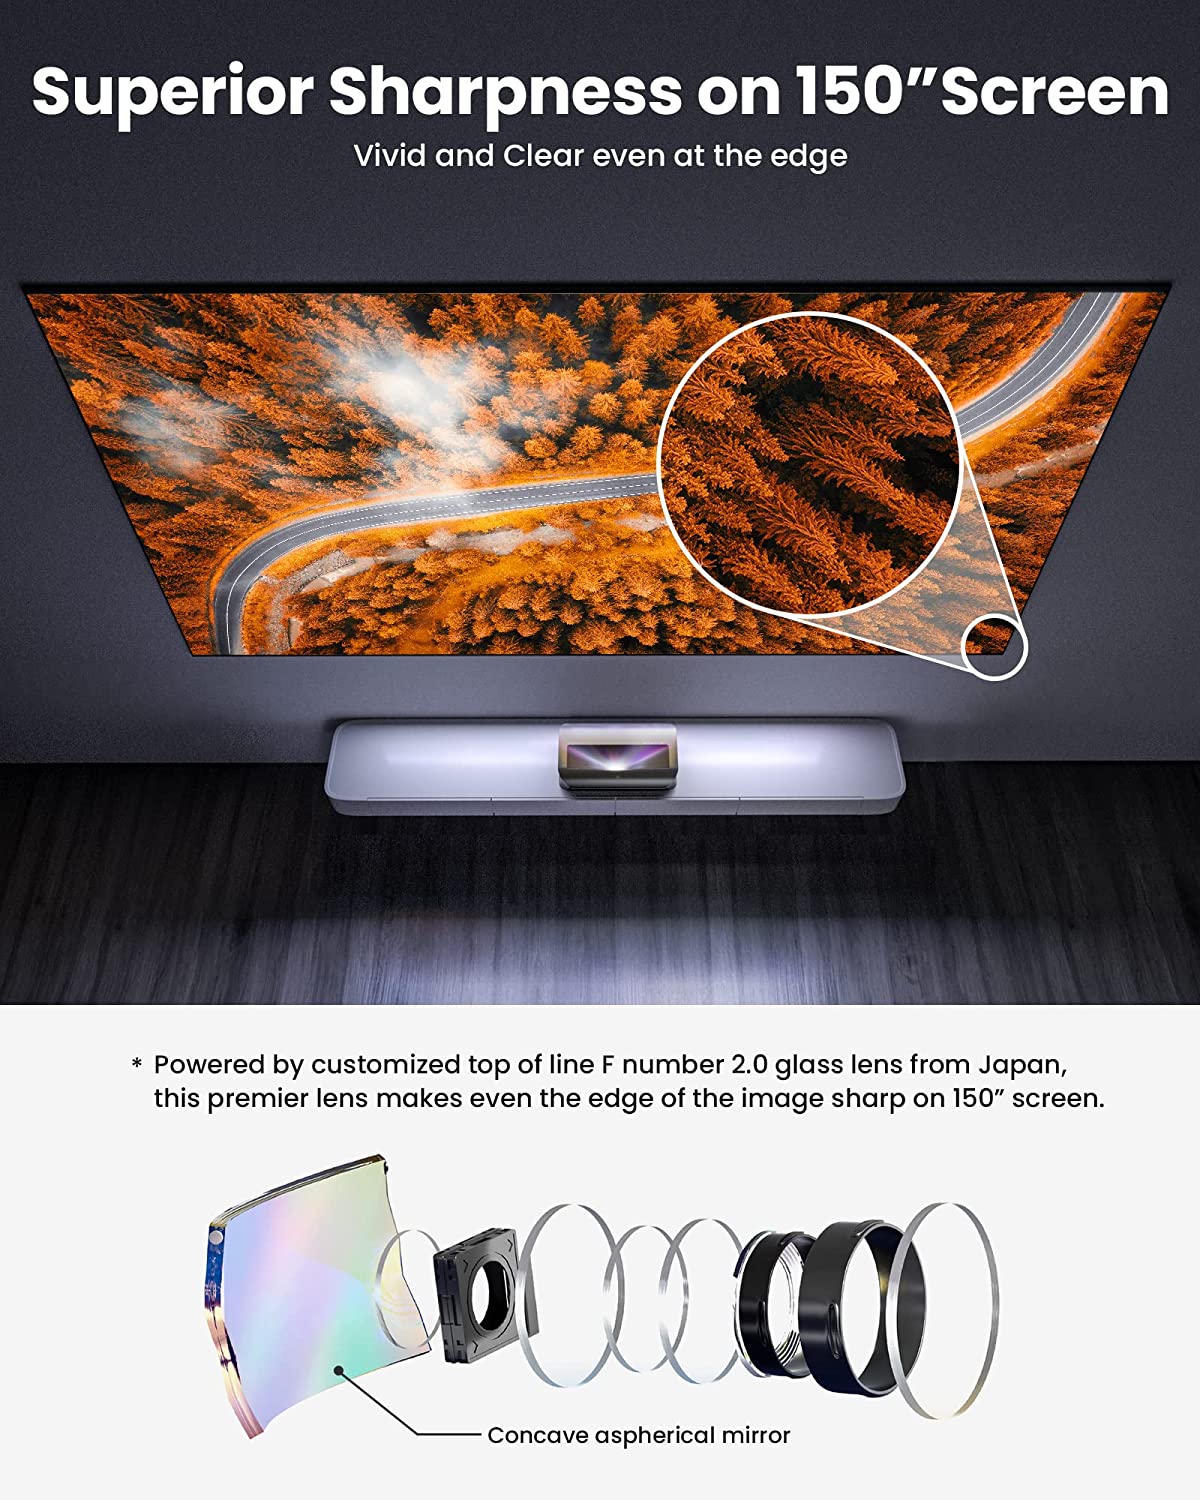 AWOL VISION LTV-3500 80”-150" 4K 3D Laser TV, 3500 ANSI Lumen Ultra Short Throw Triple Laser Projector Without Color Wheel, HDR10+ Dolby Atoms Home Theatre UST Projector